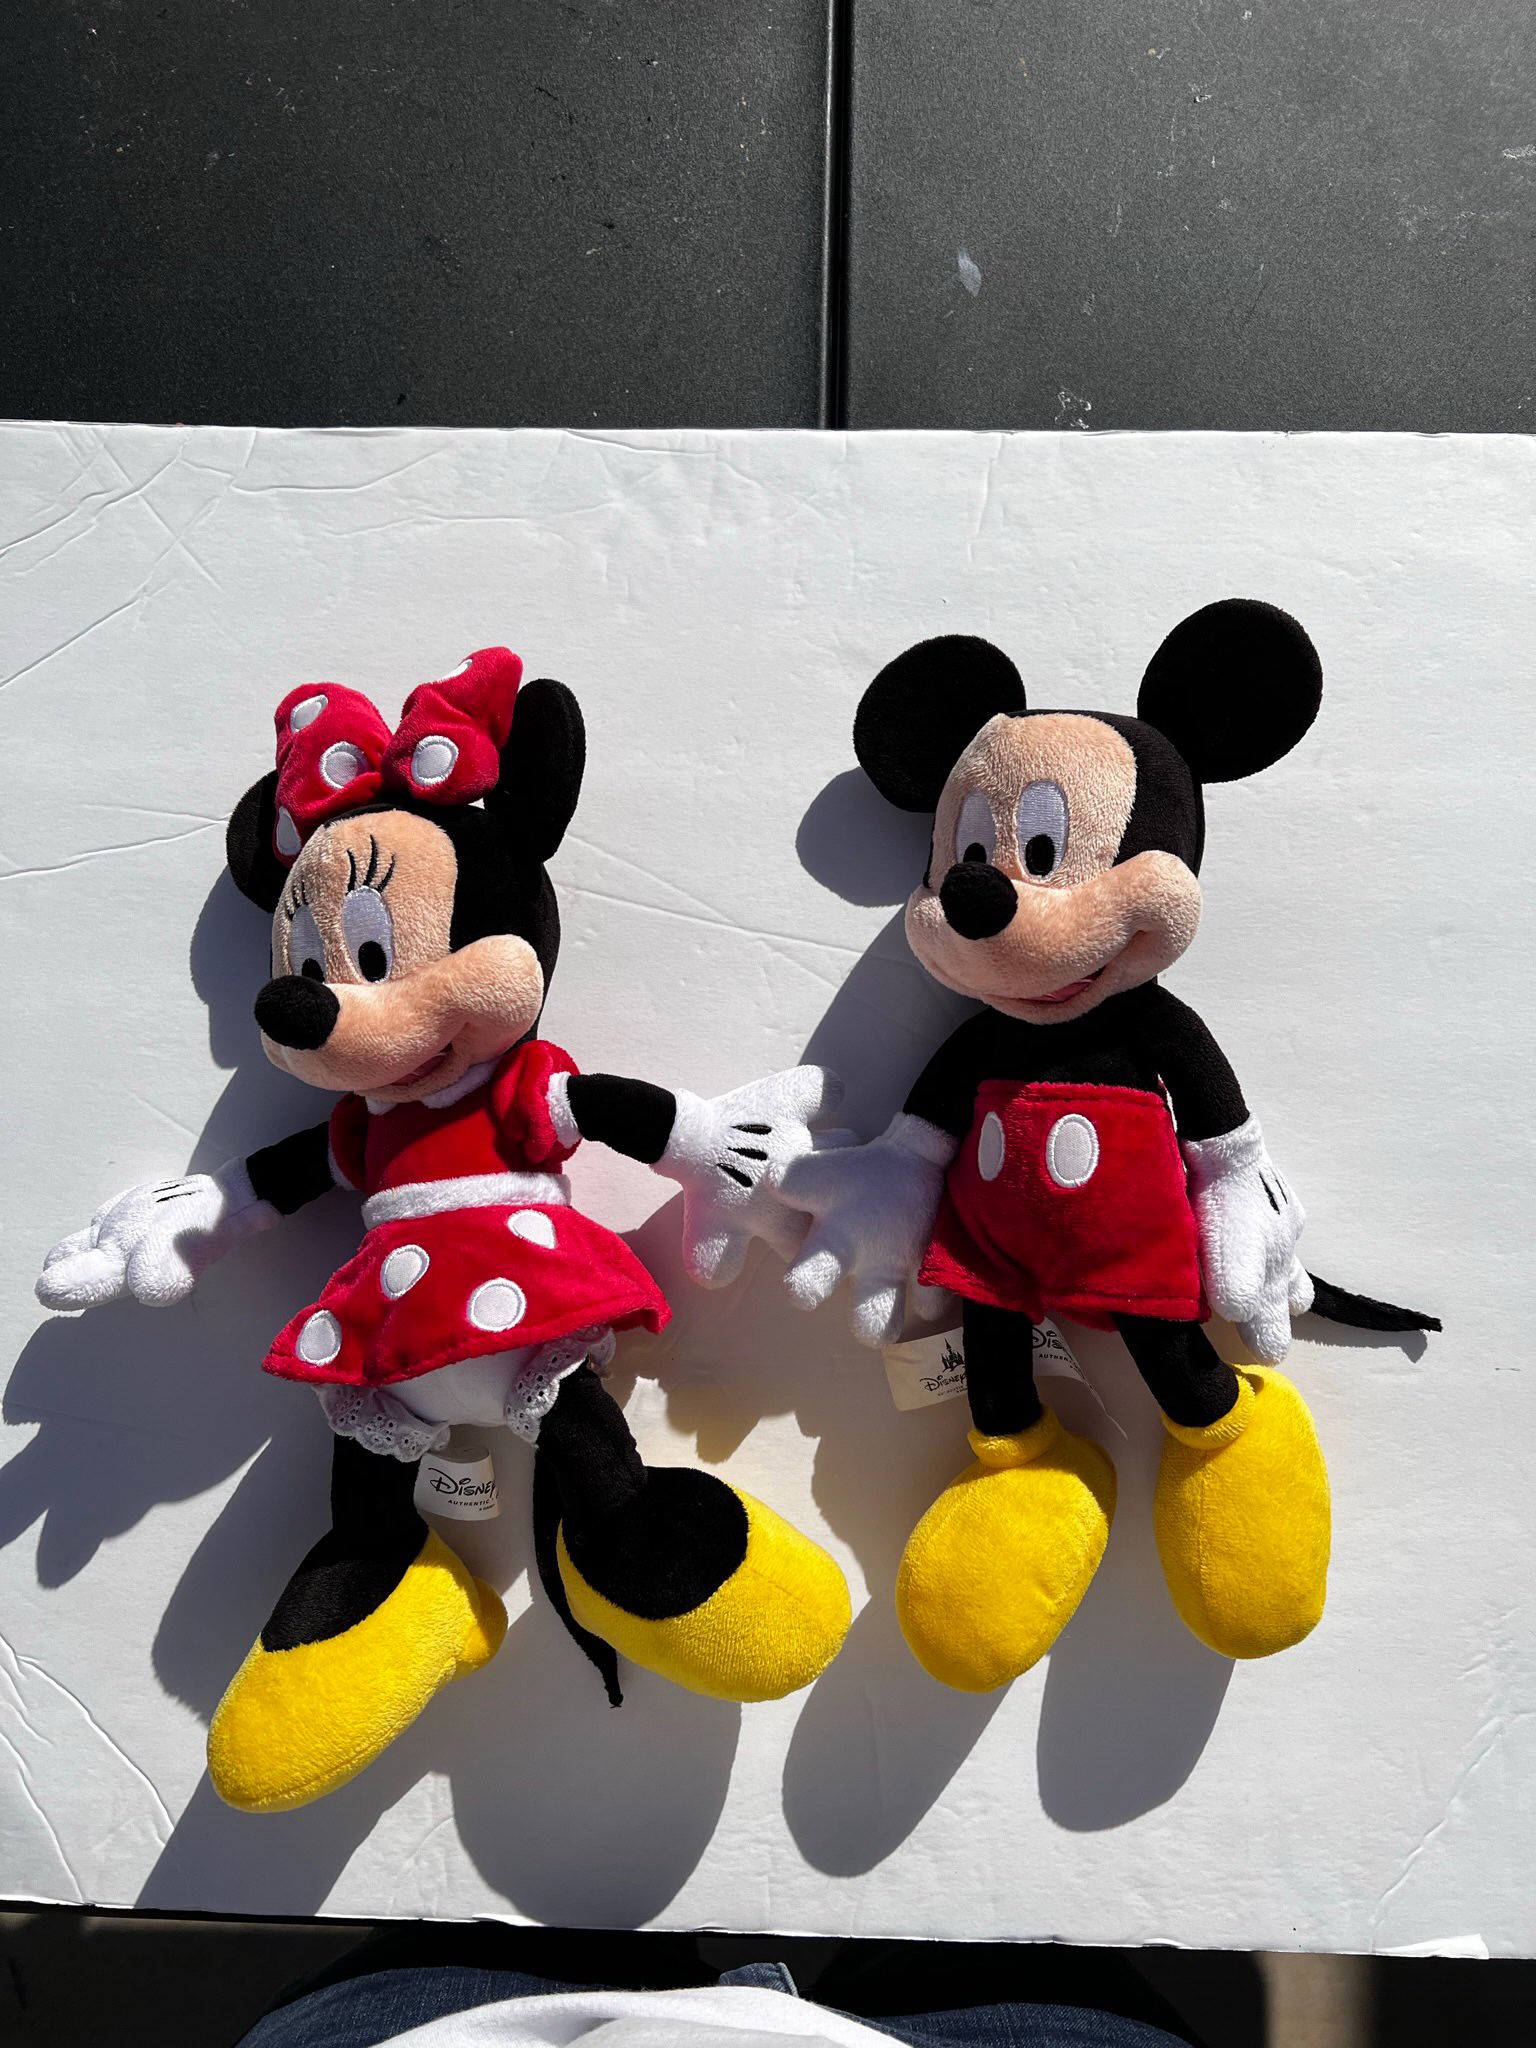 Mickey Mouse and Minnie mouse plush dolls